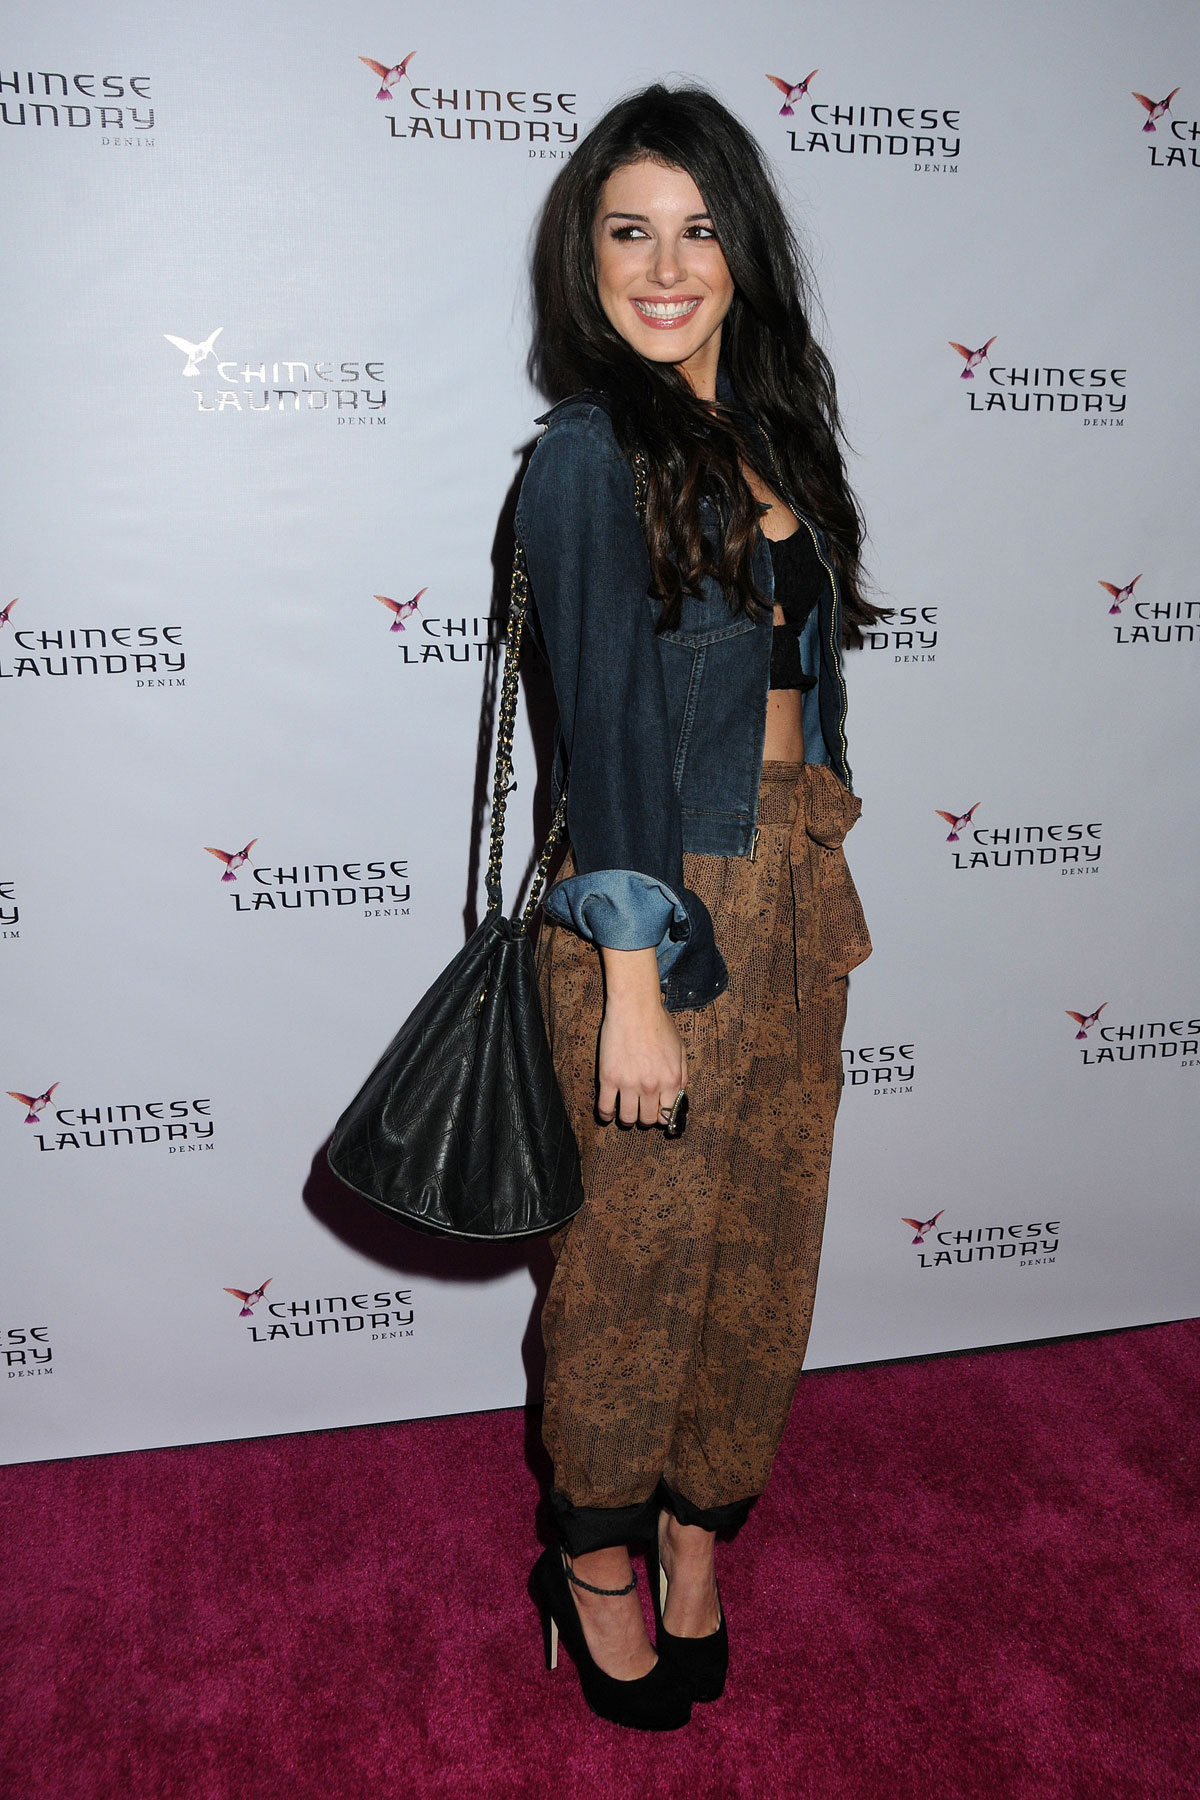 SHENAE GRIMES at the Chinese Laundry Fashion Denim Launch in Hollywood ...